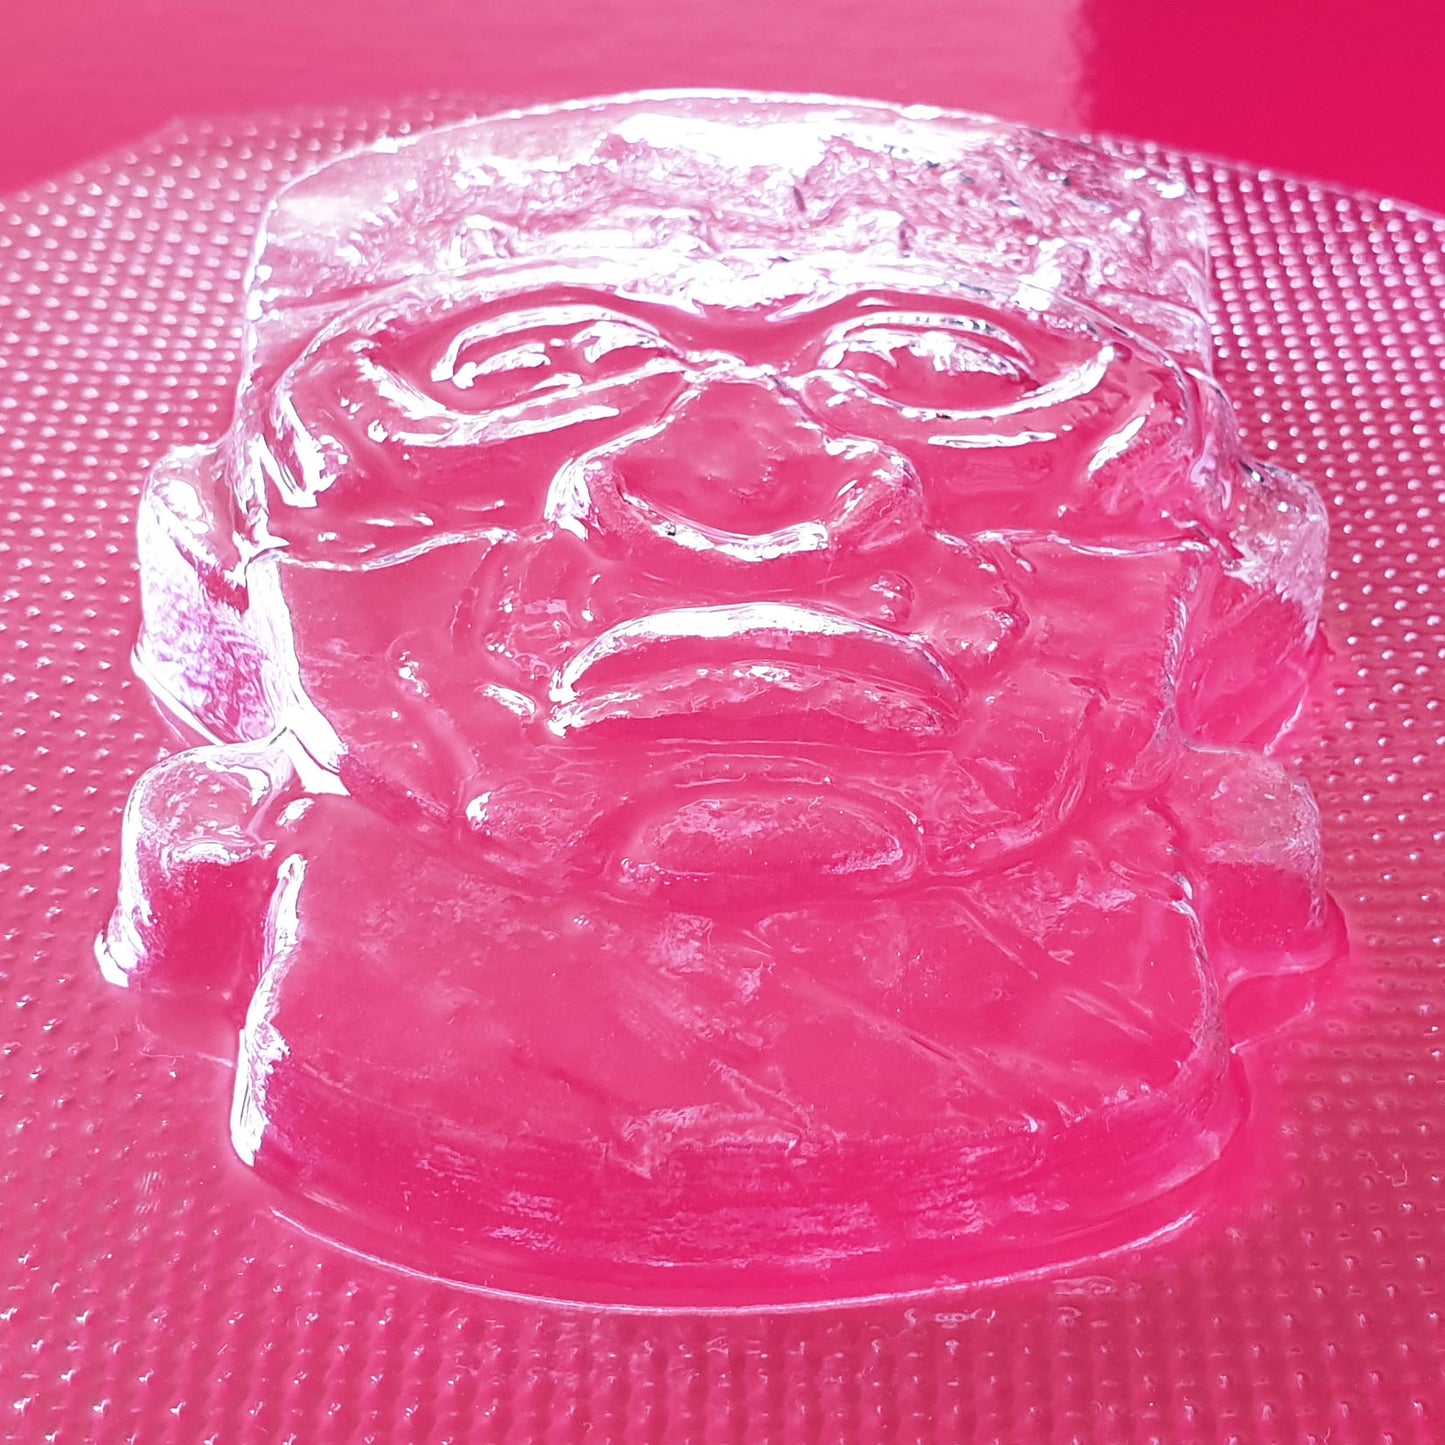 Frankenstein Mould | Truly Personal | Bath Bomb, Soap, Resin, Chocolate, Jelly, Wax Melts Mold